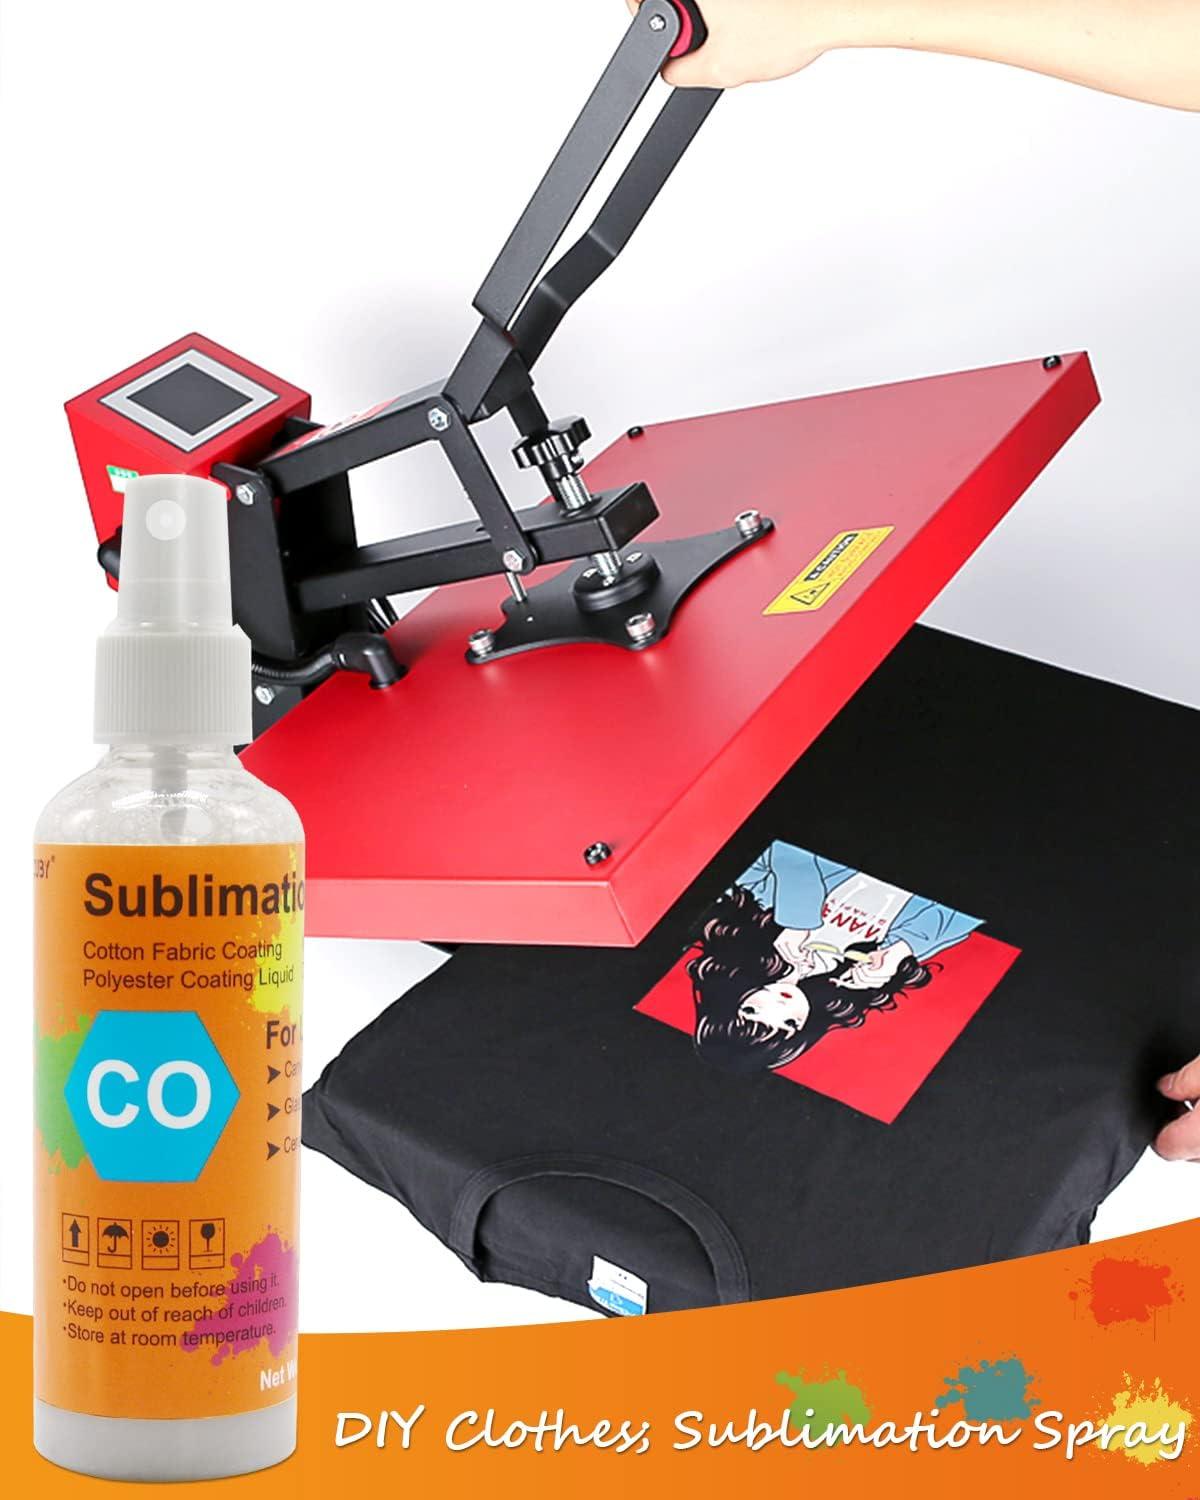 Yocuby 3.38OZ Sublimation Coating Spray for Cotton T-Shirts